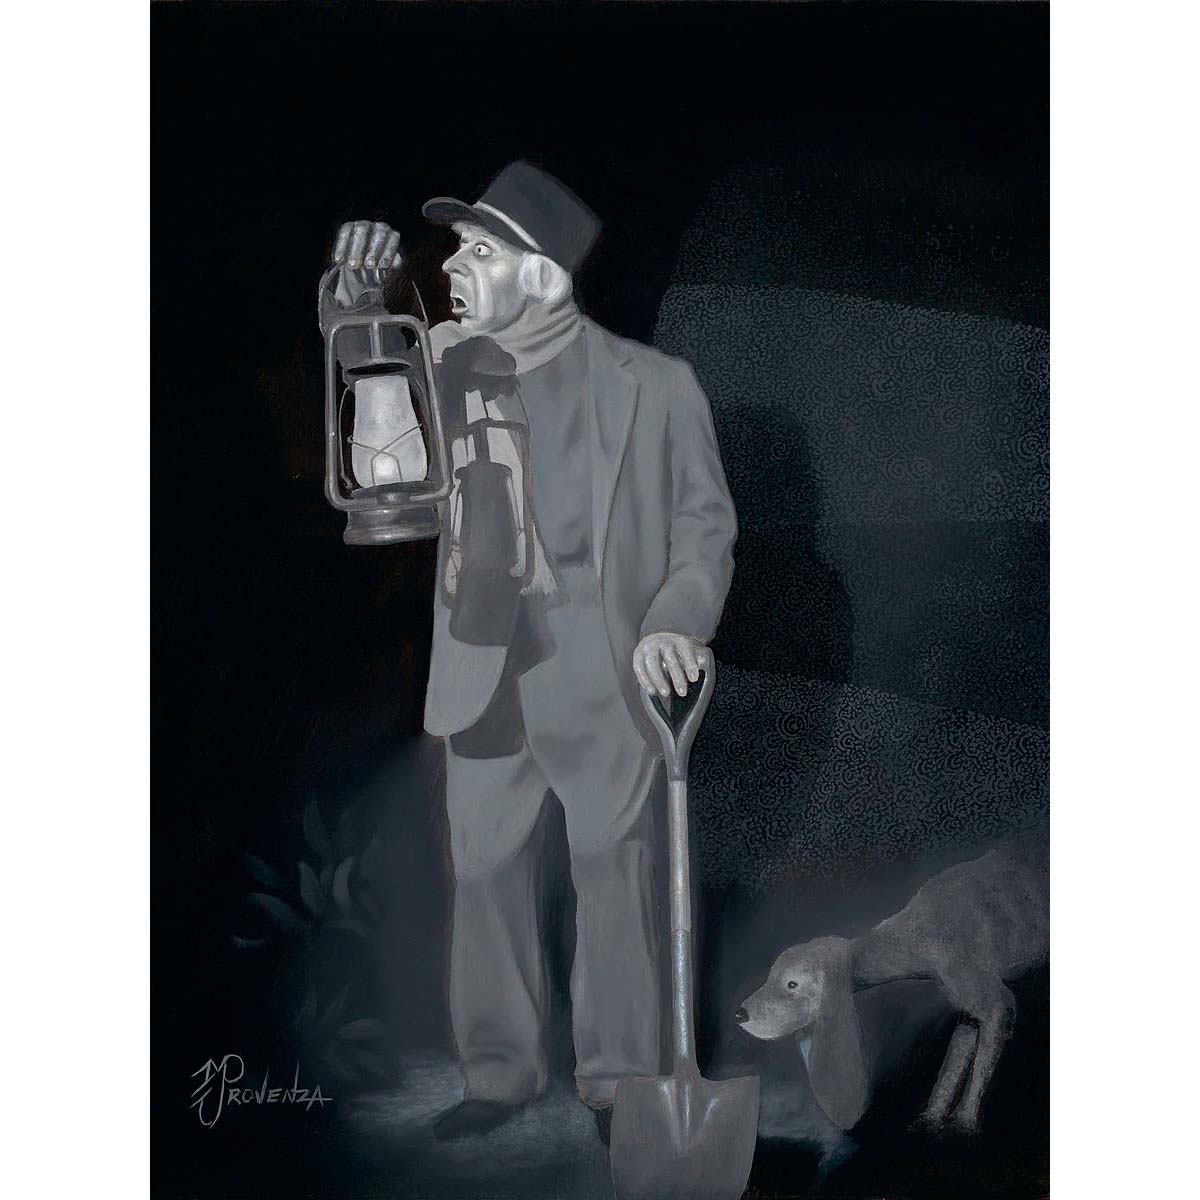 Michael Provenza Disney "The Caretaker" Limited Edition Canvas Giclee